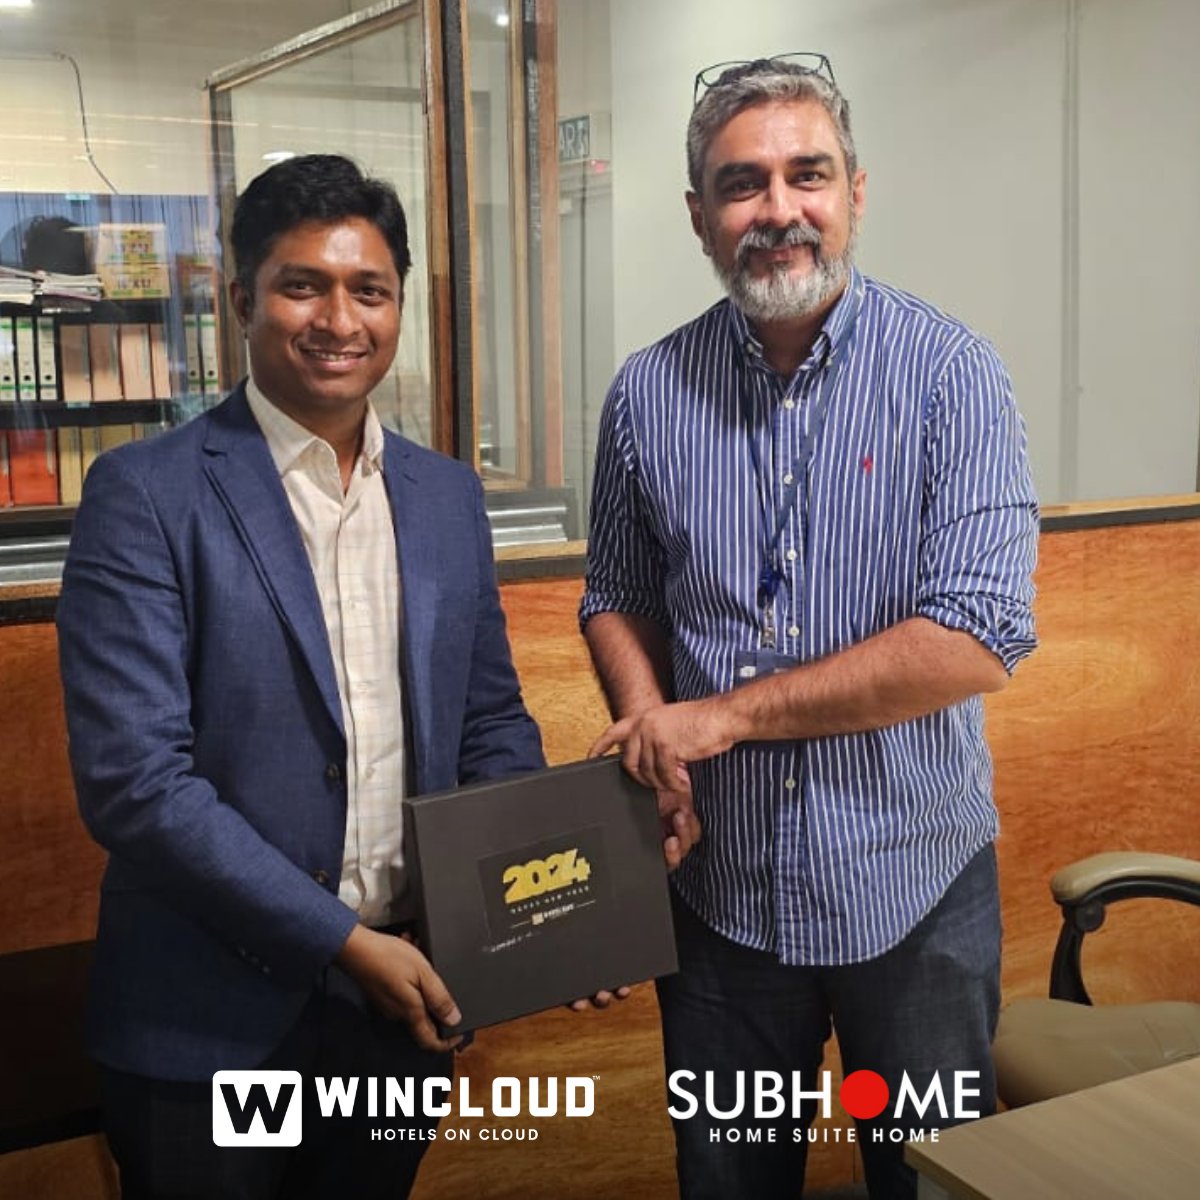 Hello from Malaysia! 

Our General Manager, Ashok, had a fantastic catch-up and engaged in enriching discussions with Sandeep, the Chief Executive Officer of Sub Home in Malaysia.

#Hospitality #WINCLOUD #Subhome #Hoteltech #Malaysia